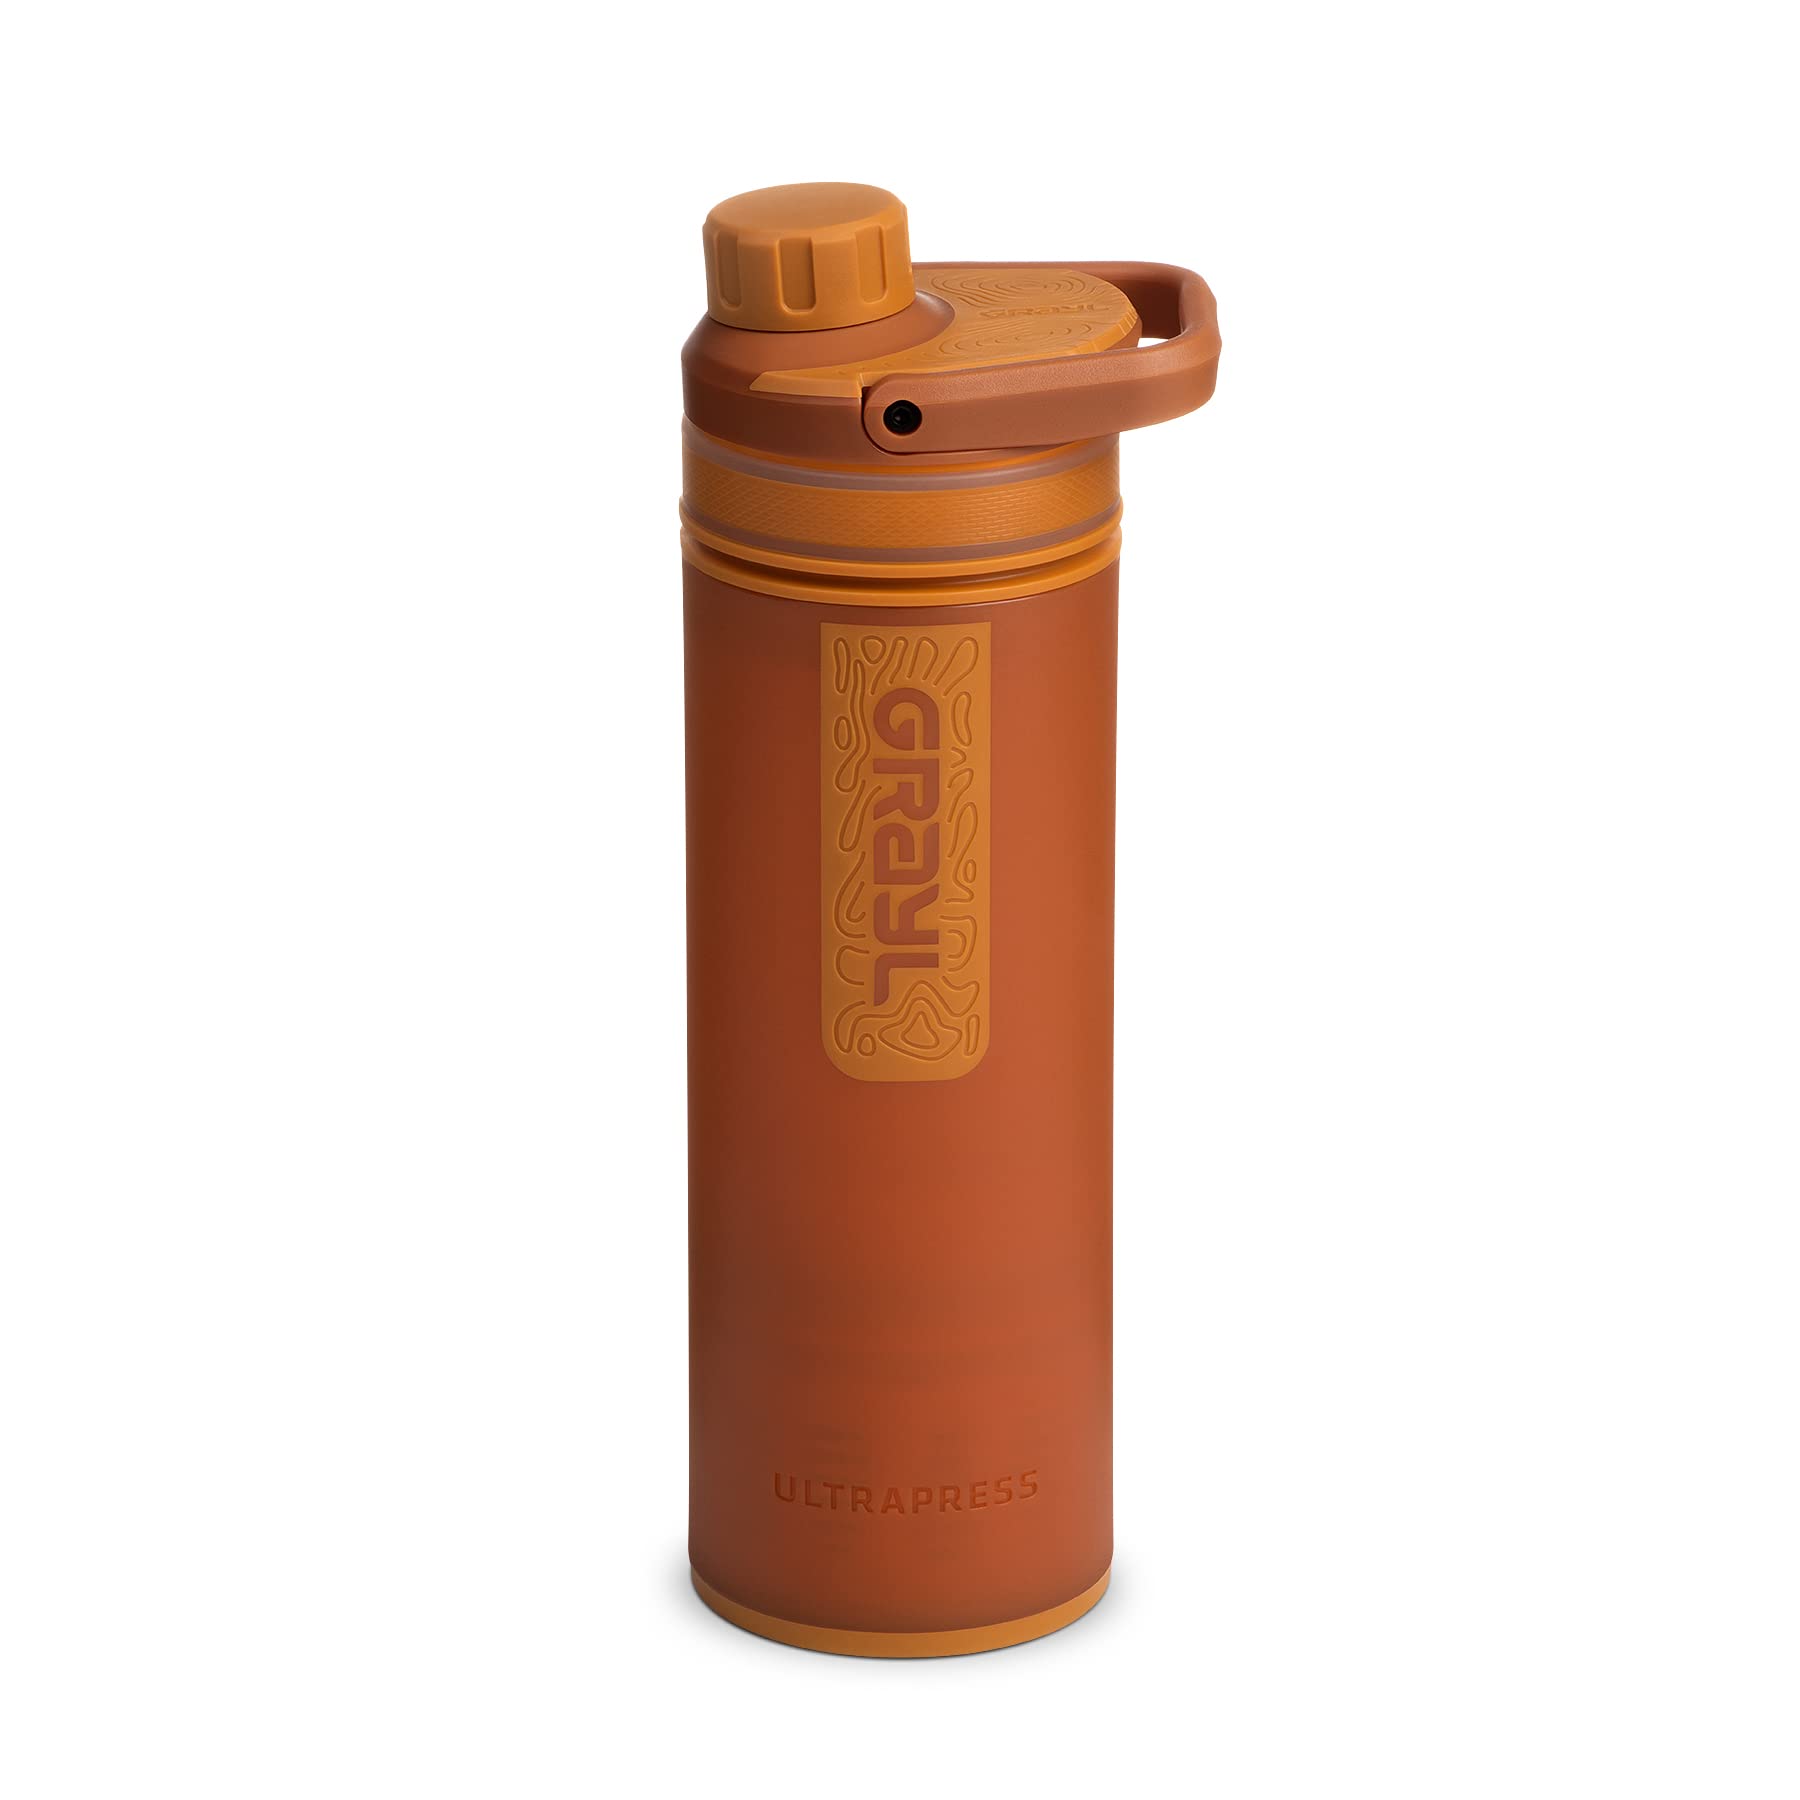 GRAYL UltraPress Water Purifier & Filter Bottle for Hiking, Backpacking, and Travel (Mojave Redrock)